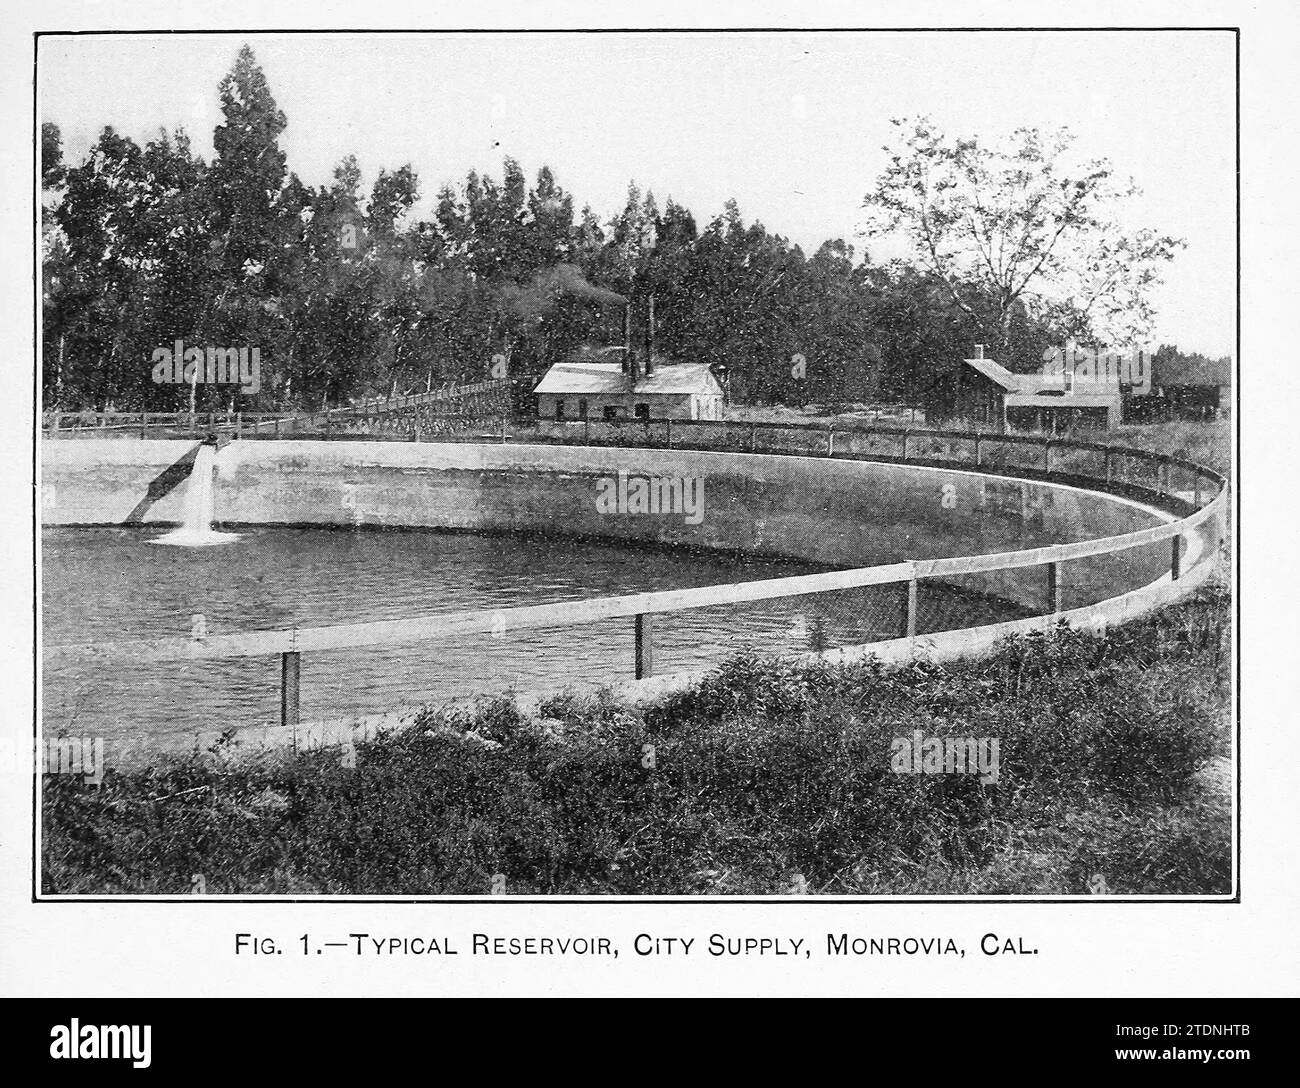 Typical reservoir, city supply, Monrovia, CA from the book ' The storage of water for irrigation purposes ' by Fortier, Samuel; Bixby, F. L; United States. Office of Experiment Stations; United States. Department of Agriculture Stock Photo